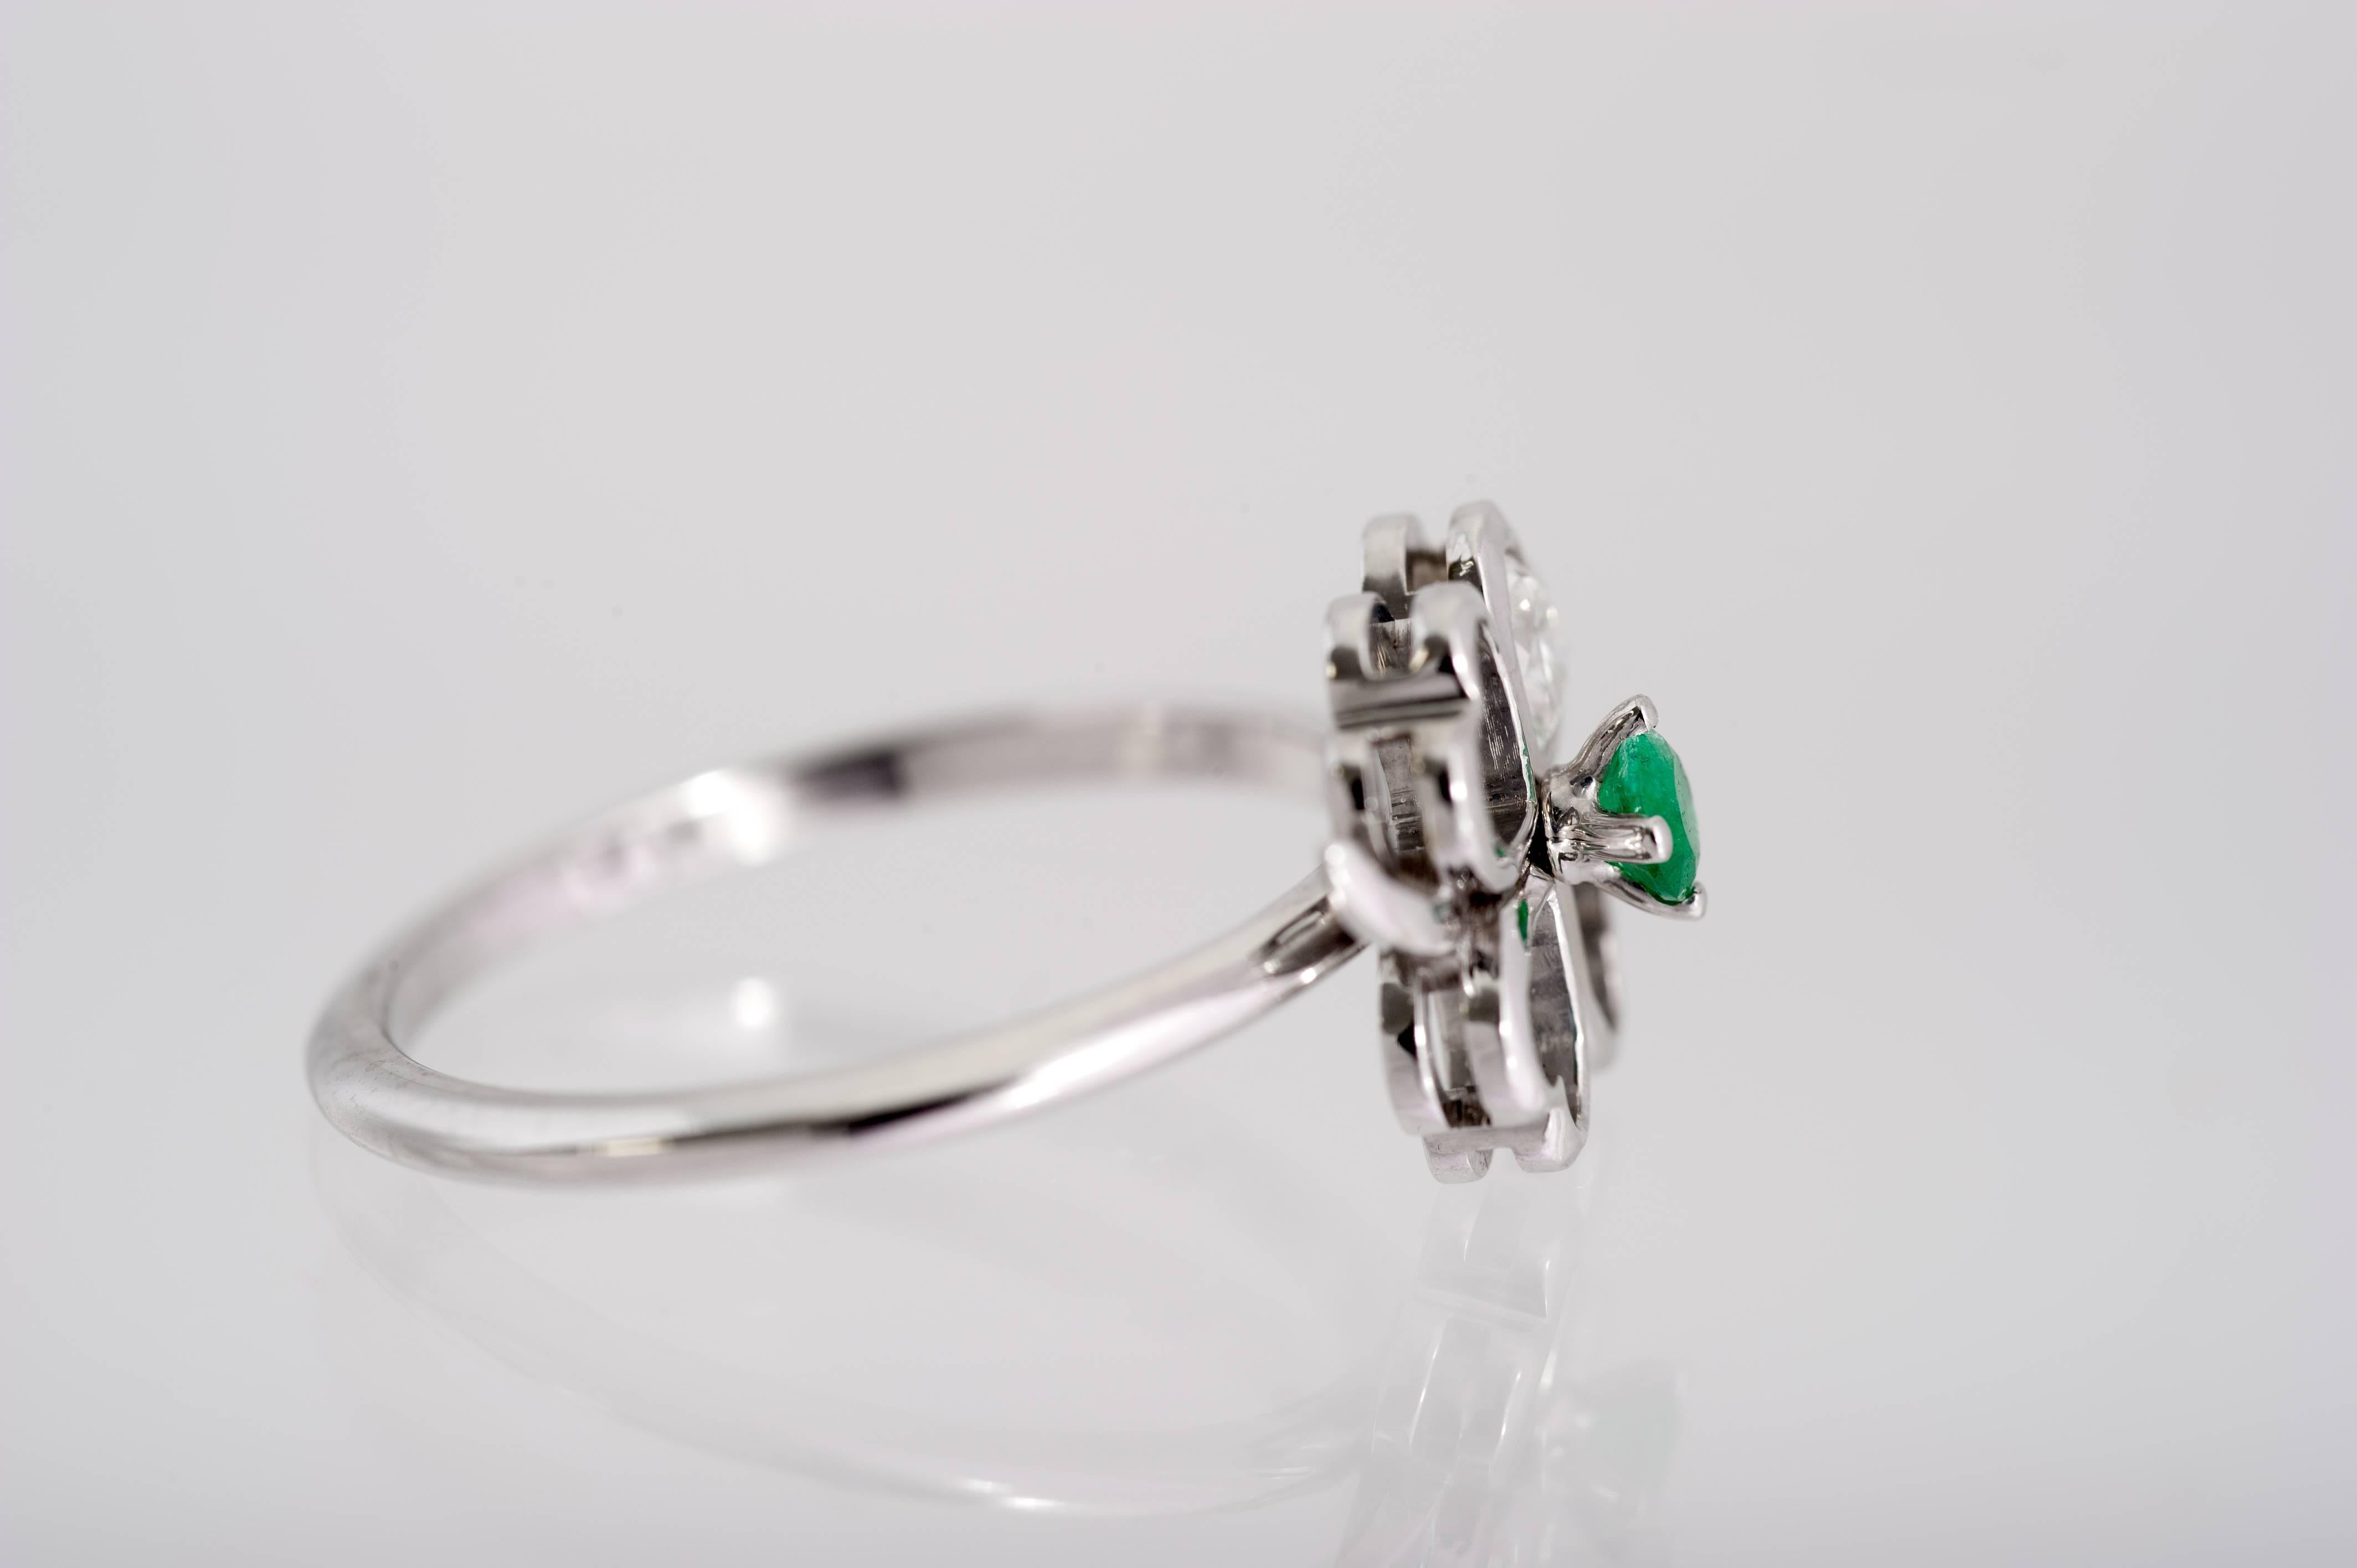 According to Irish tradition, four-leaf clover gives good luck for his finder, as each leaf in the clover symbolizes good omens for faith, hope, love, and luck . 
This one of a kind handcrafted ring is set with a 0.22 Carat Heart Shaped Diamond that